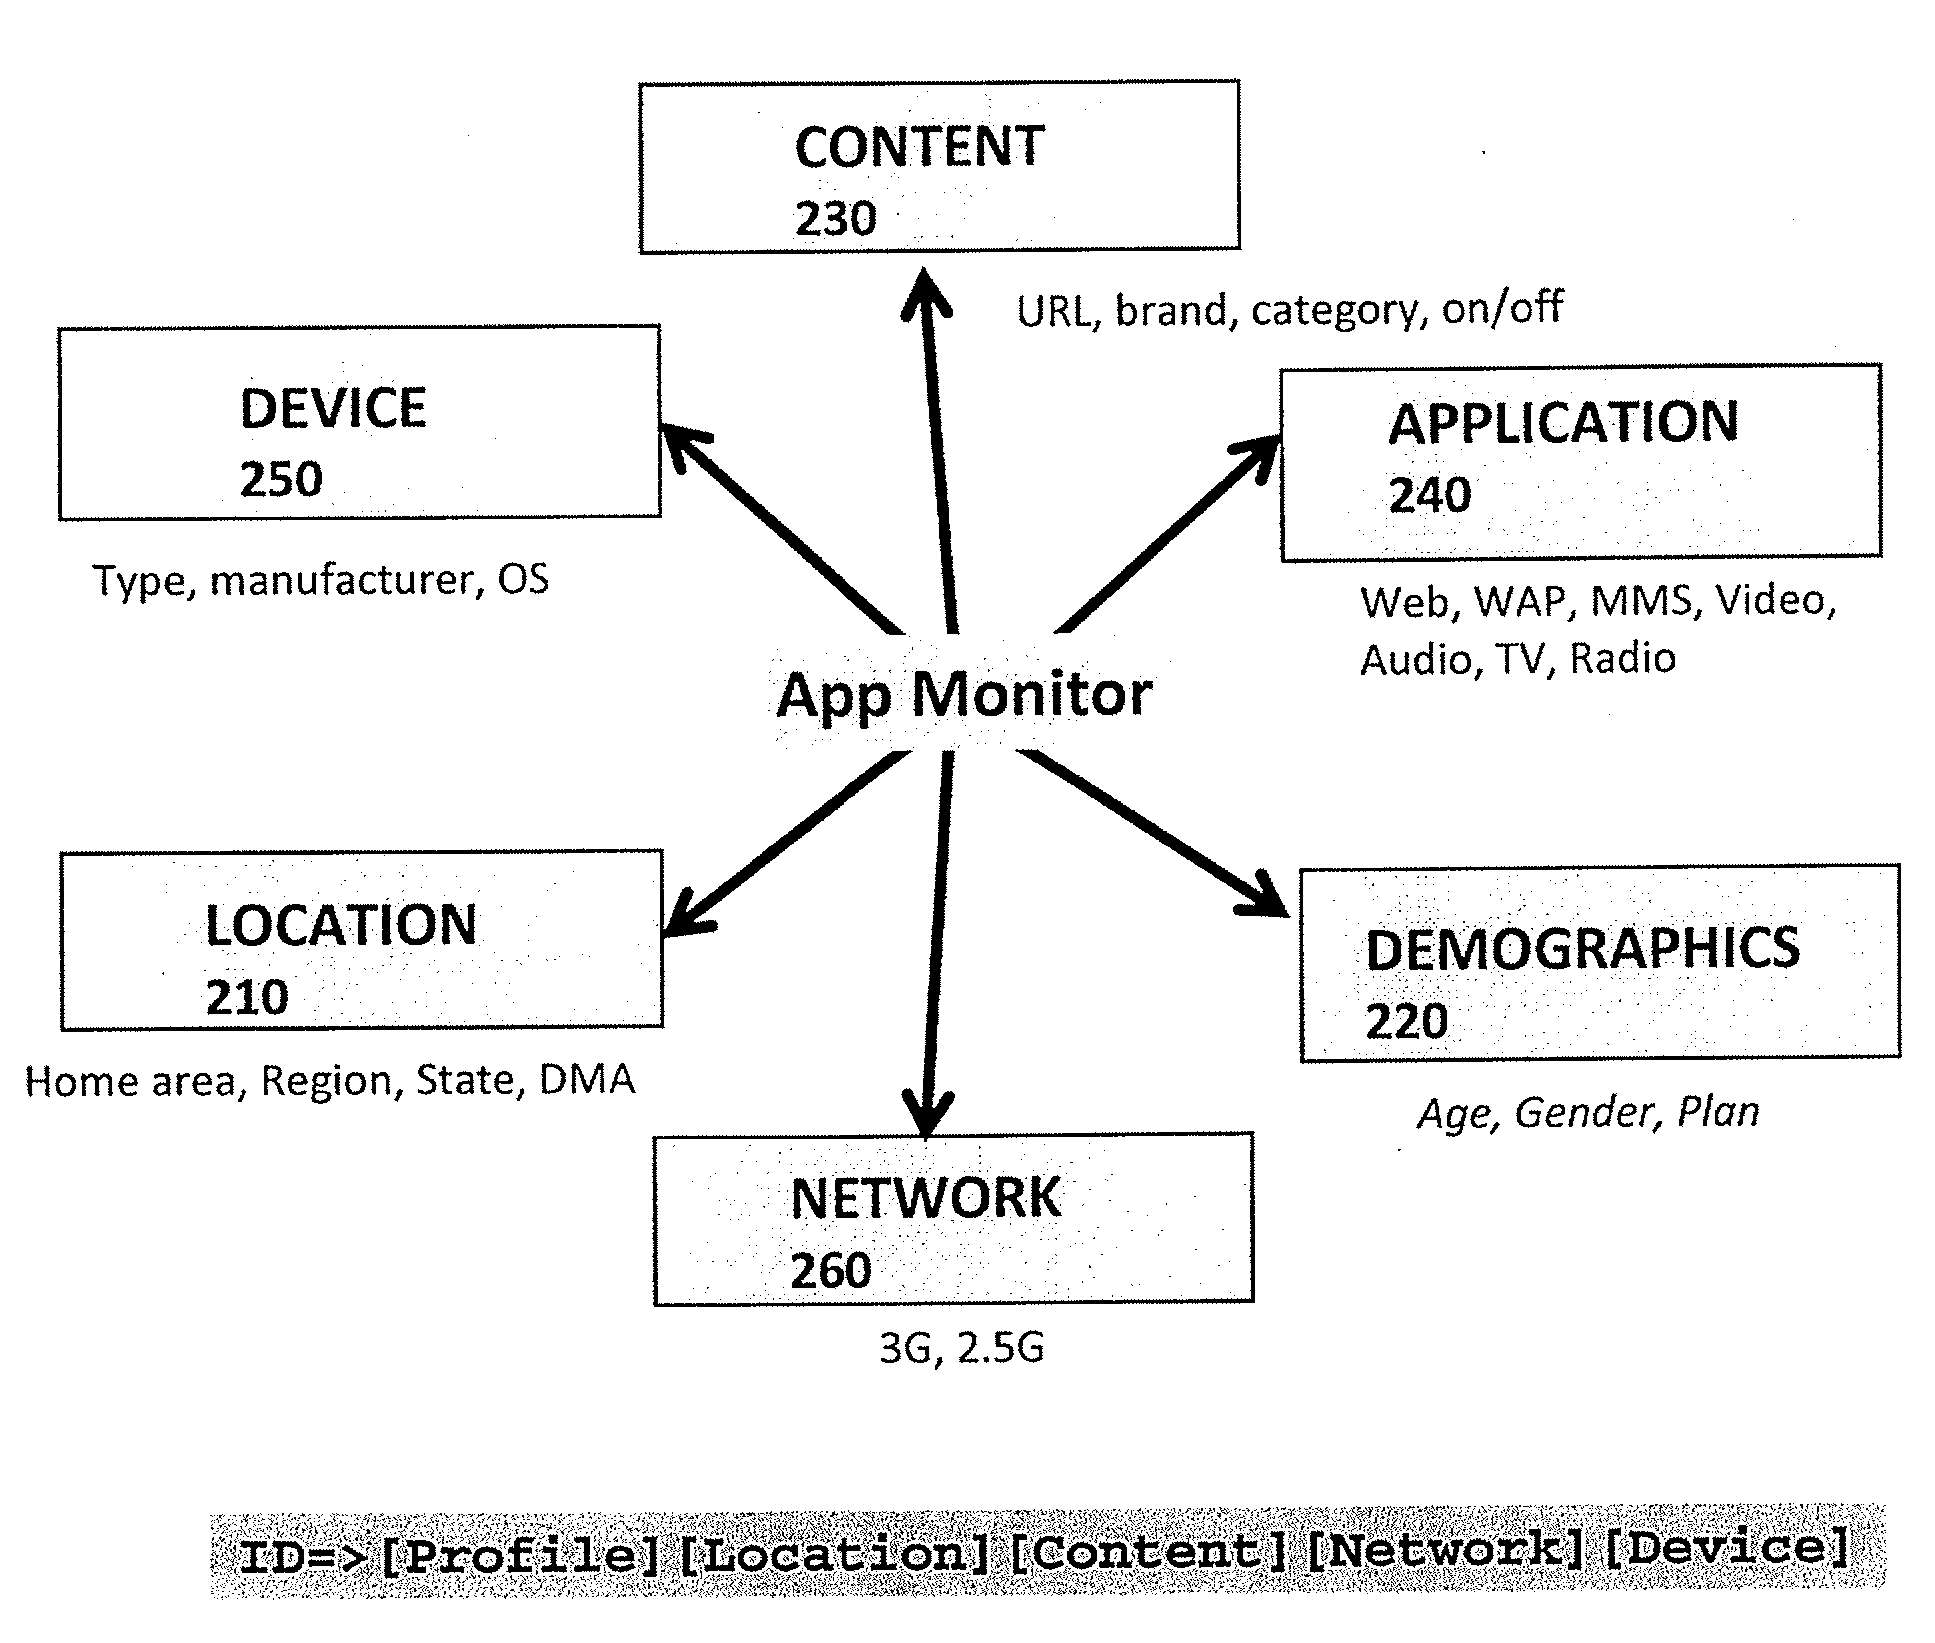 System and method for collecting, reporting and analyzing data on application-level activity and other user information on a mobile data network